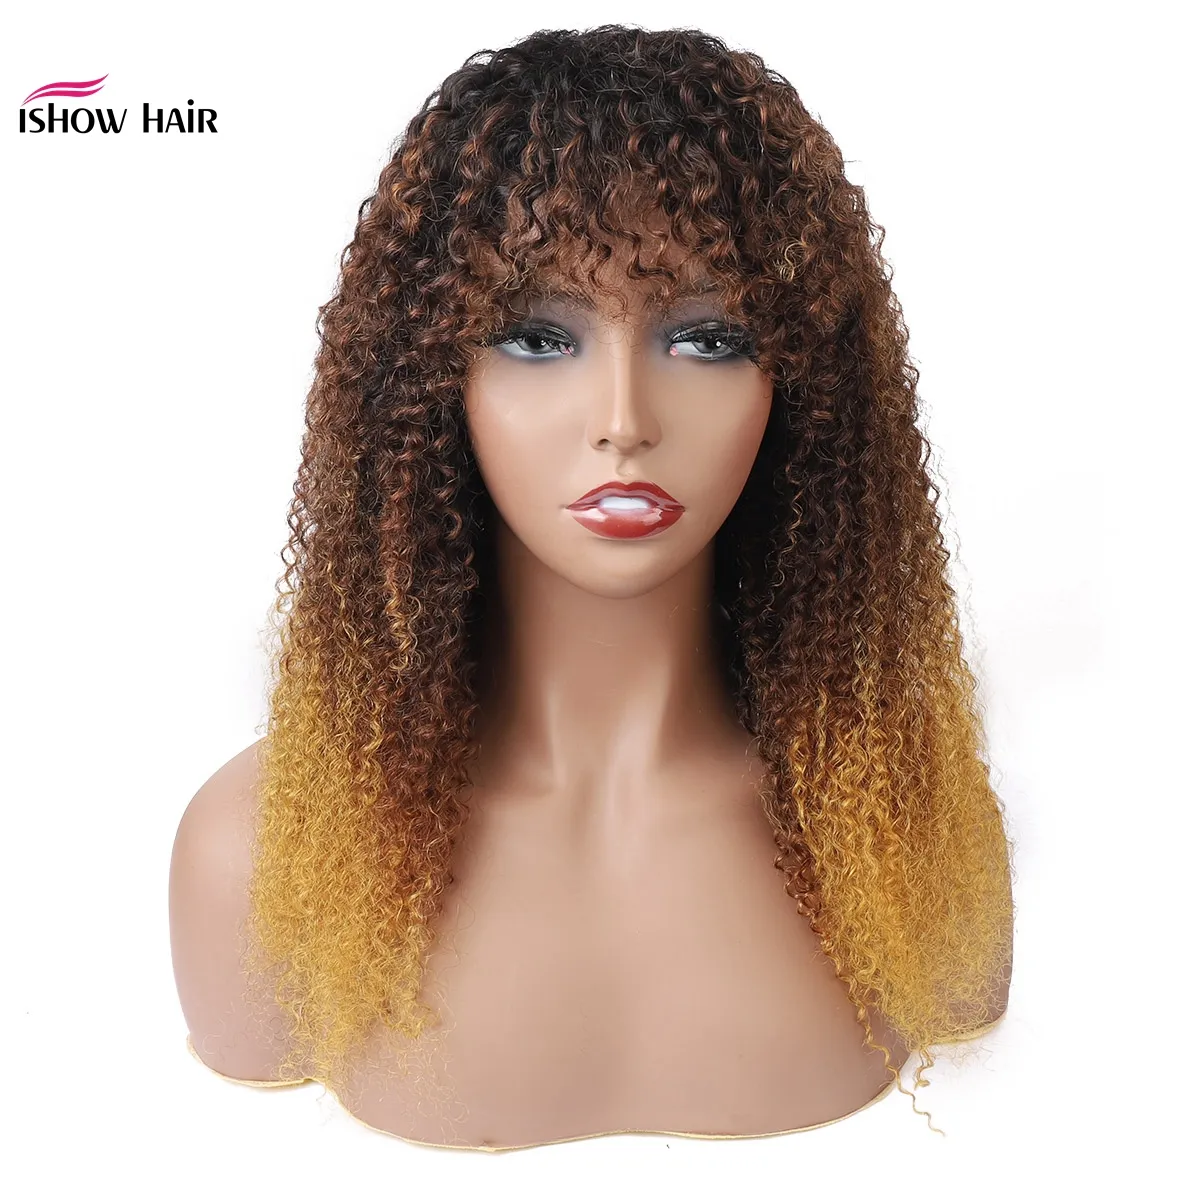 Ishow Brazilian Kinky Curly Human Hair Wigs with Bangs 1b/4/27 Ombre Color Black Brown Peruvian None Lace Wig Indian Malaysian for Women All Ages 8-28inch